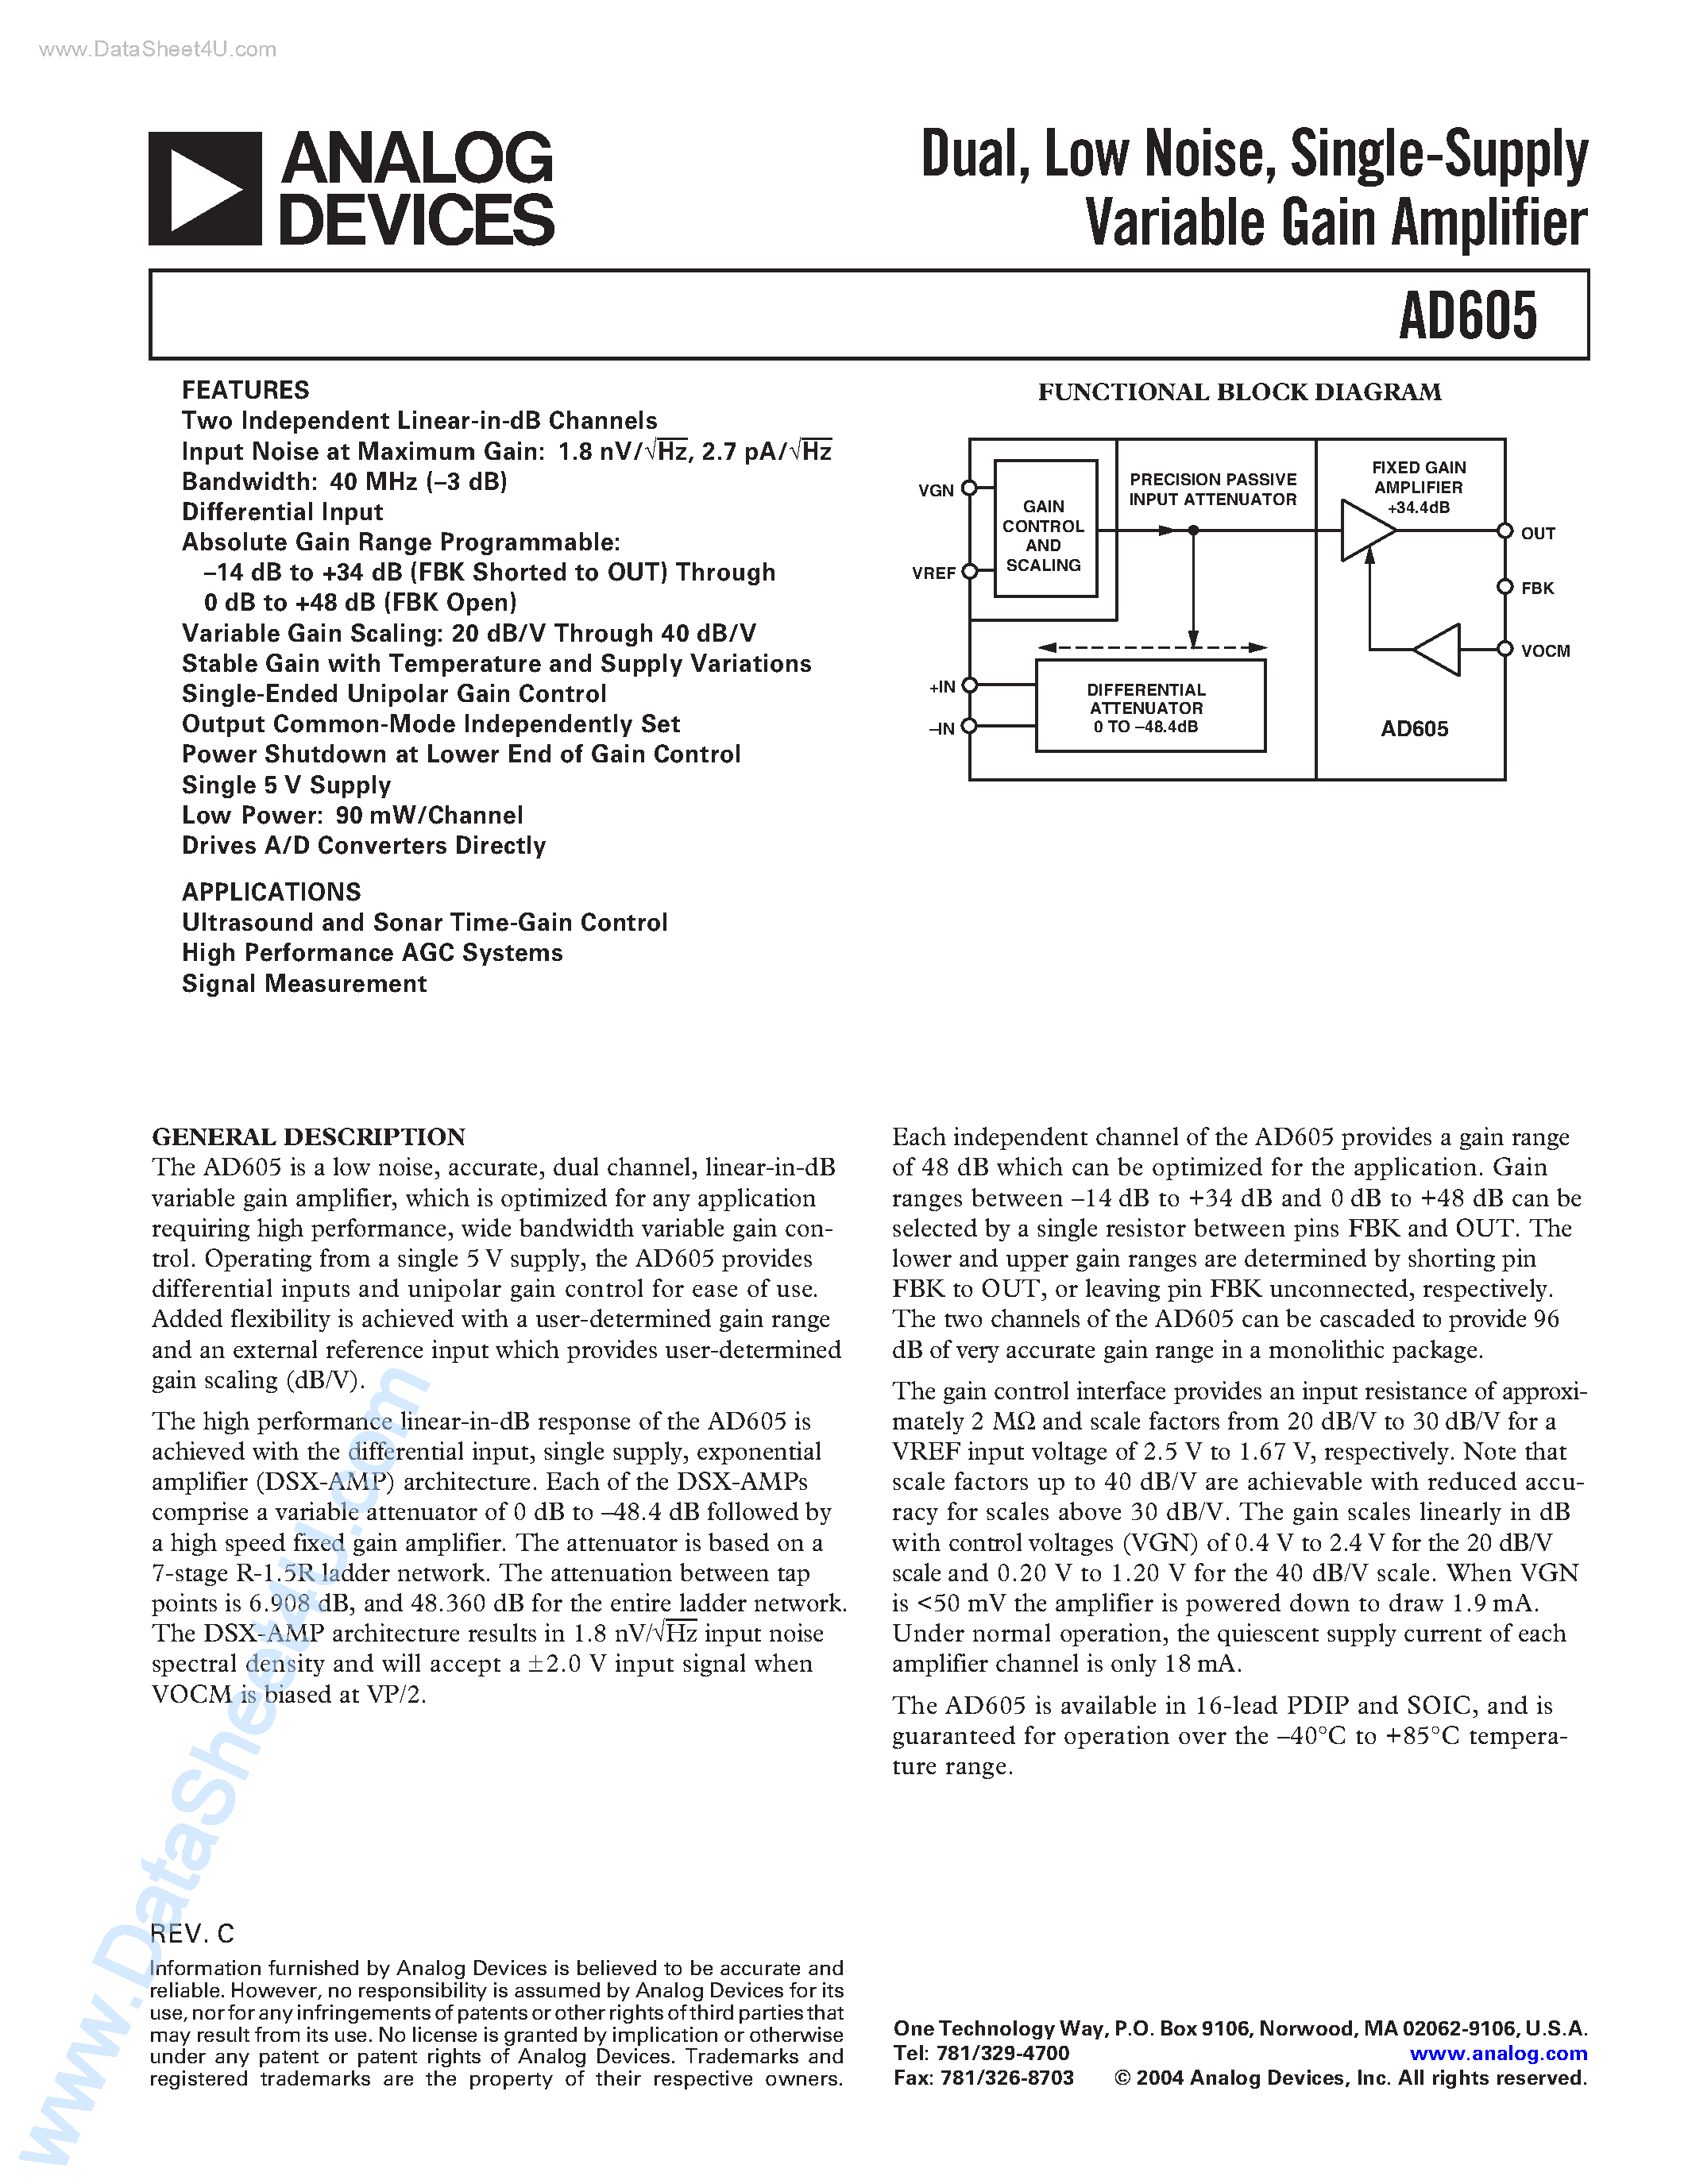 Datasheet AD605B - Dual/ Low Noise/ Single-Supply Variable Gain Amplifier page 1